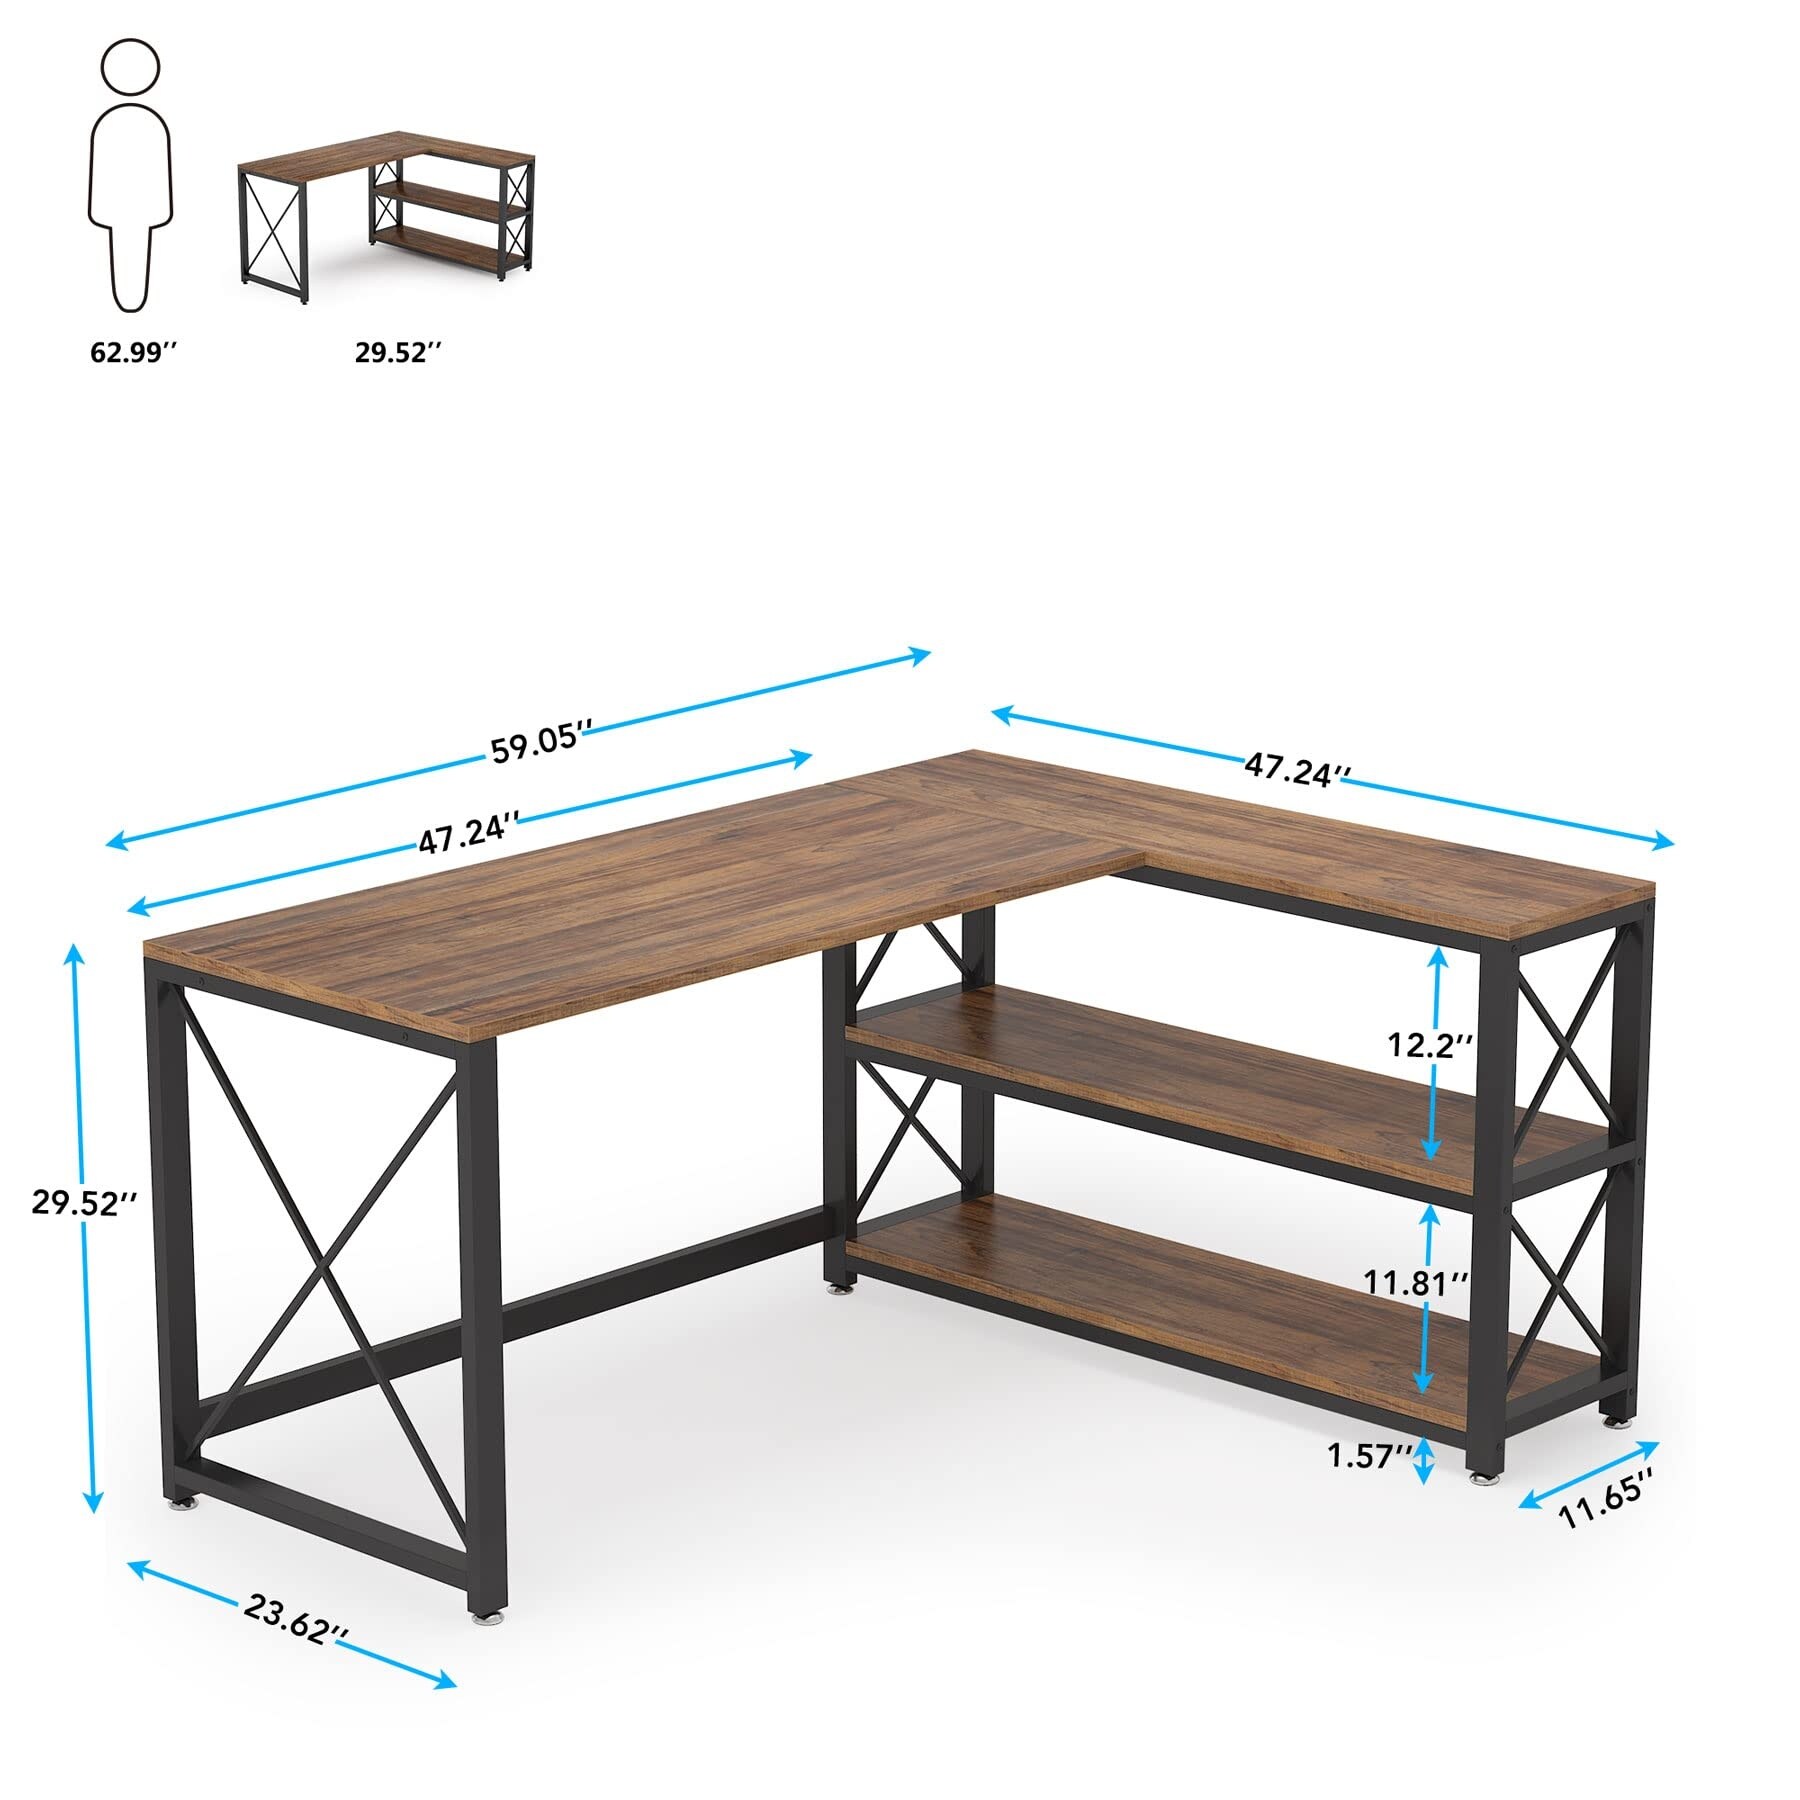 https://ak1.ostkcdn.com/images/products/is/images/direct/4fe01929934998eb97a58e67ac1949a7ef8f9493/Industrial-L-Shaped-Desk-with-Storage-Shelves%2C-Corner-Computer-Desk-PC-Laptop-Study-Table-Workstation.jpg